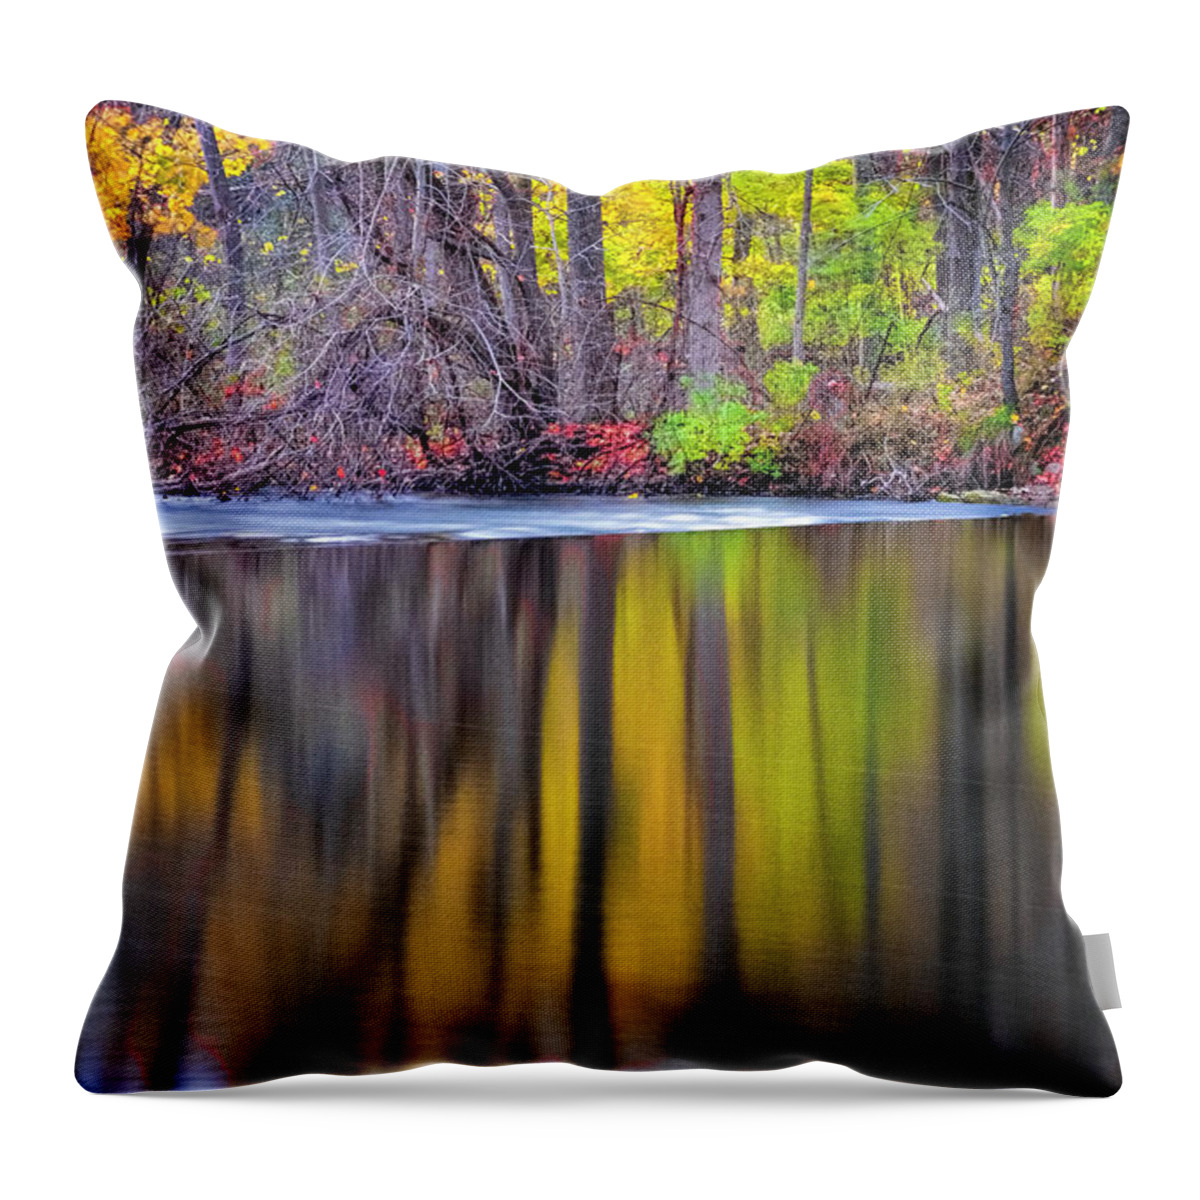 Lake Reflection Throw Pillow featuring the photograph Autumn Reflection III by Tom Singleton